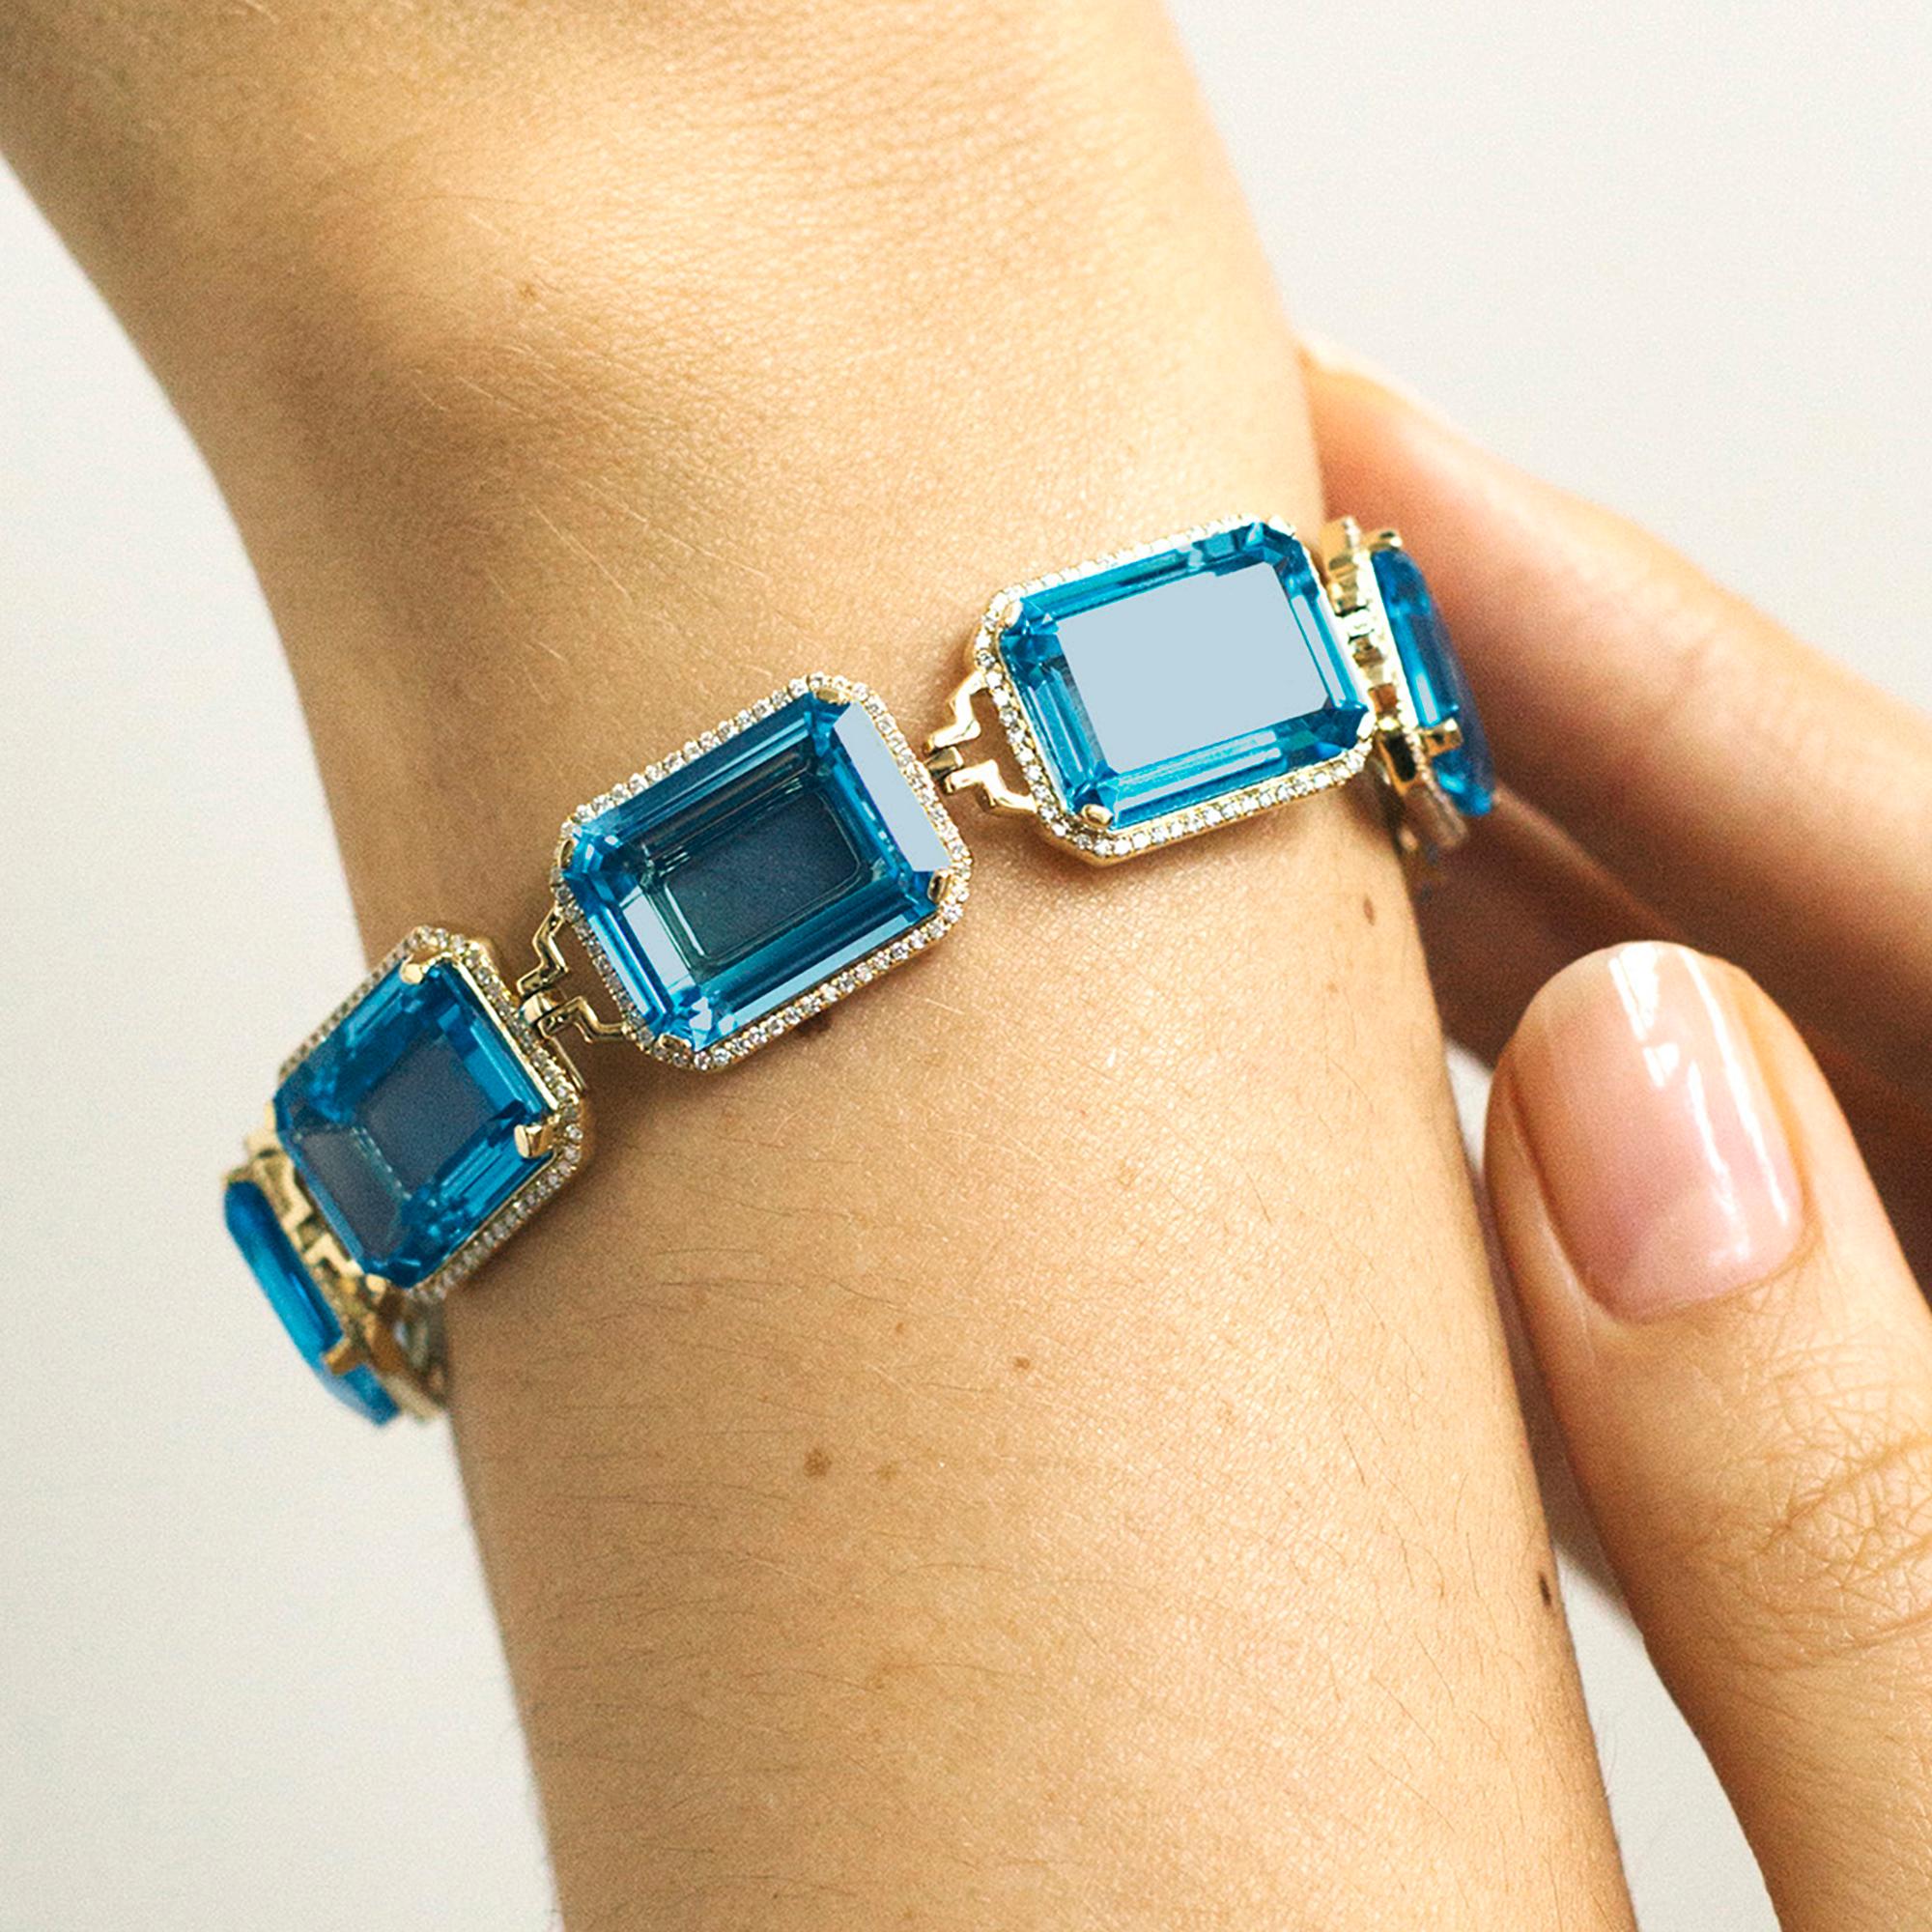 The London Blue Topaz Emerald Cut Bracelet from the 'Gossip' Collection exudes elegance and sophistication. Crafted in 18K yellow gold, it features mesmerizing emerald-cut London Blue Topaz gemstones that emit a deep, captivating blue hue. The topaz